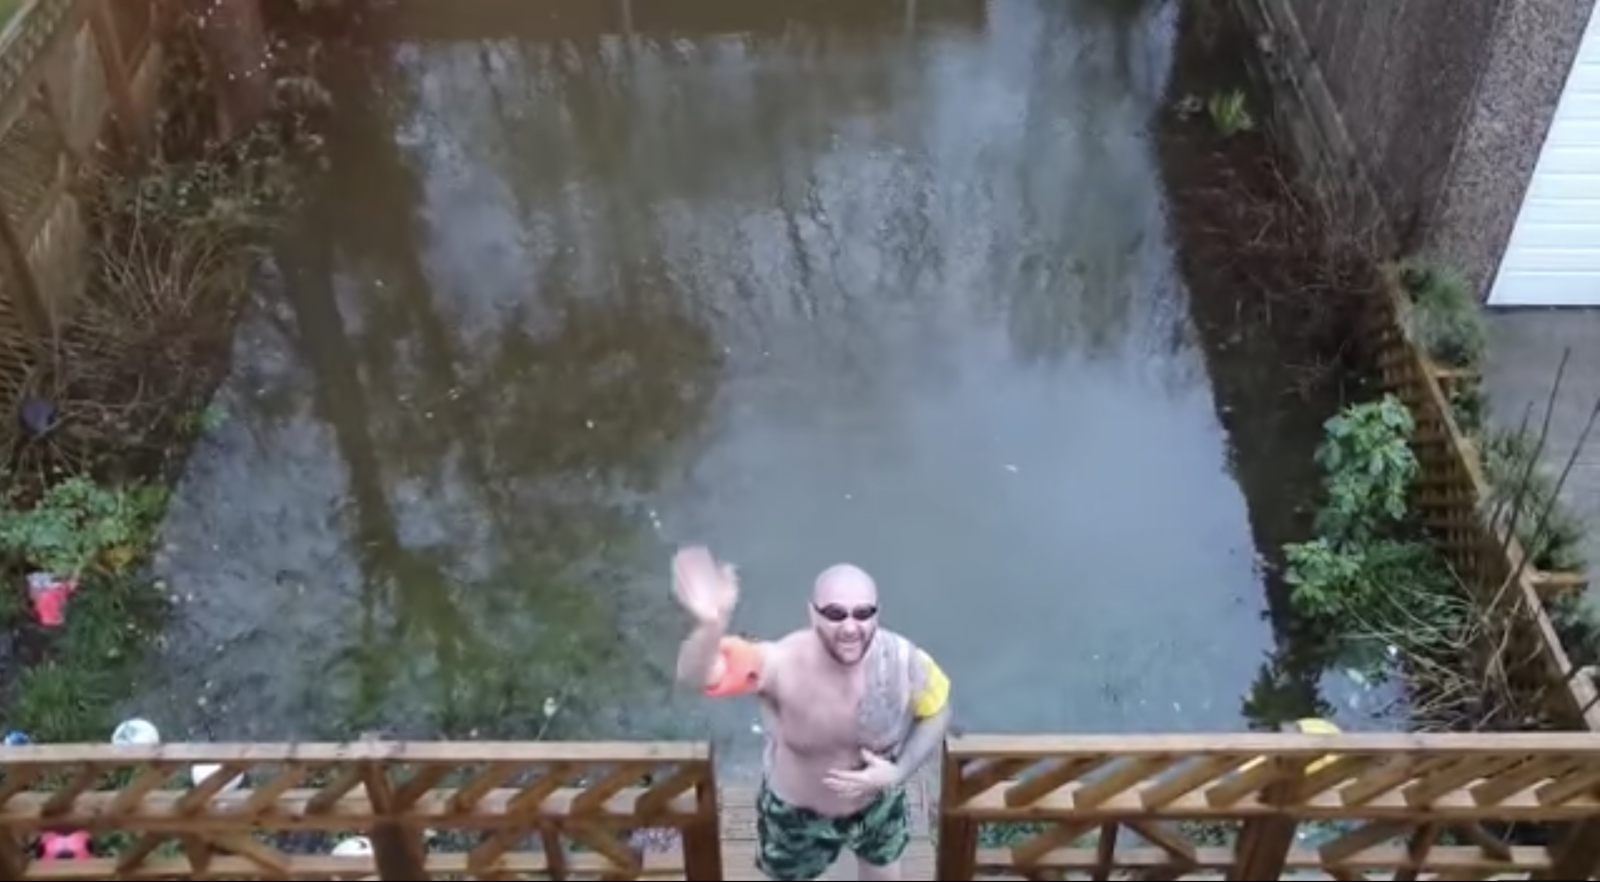 Failsworth man goes swimming in his back garden after Storm Franklin, The Manc